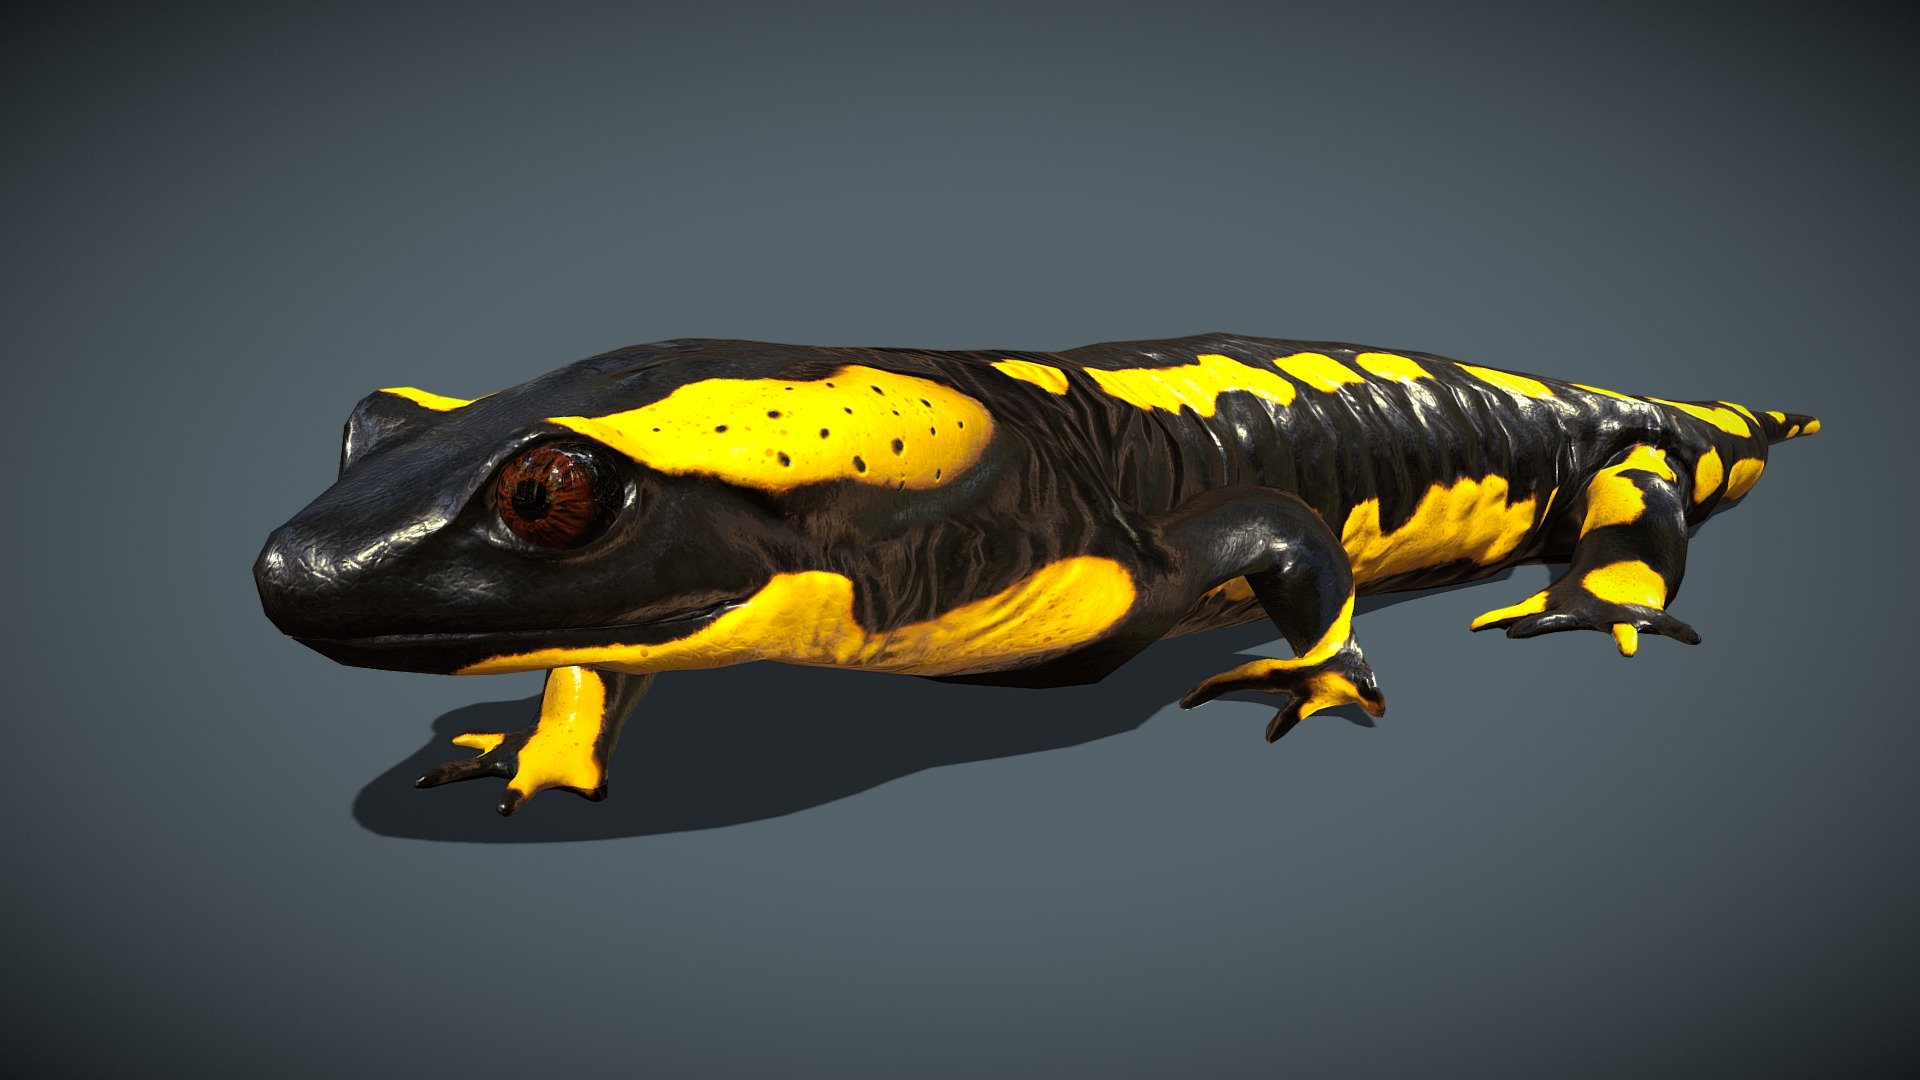 Animated fire salamander

Blender cycles render https://www.youtube.com/watch?v=z82z0zBhI-o&amp;ab_channel=Zacxophone



Made with Blender and subtance painter



If you have any questions, contact me.

 
 - Animated fire salamander - Buy Royalty Free 3D model by Zacxophone 3d model